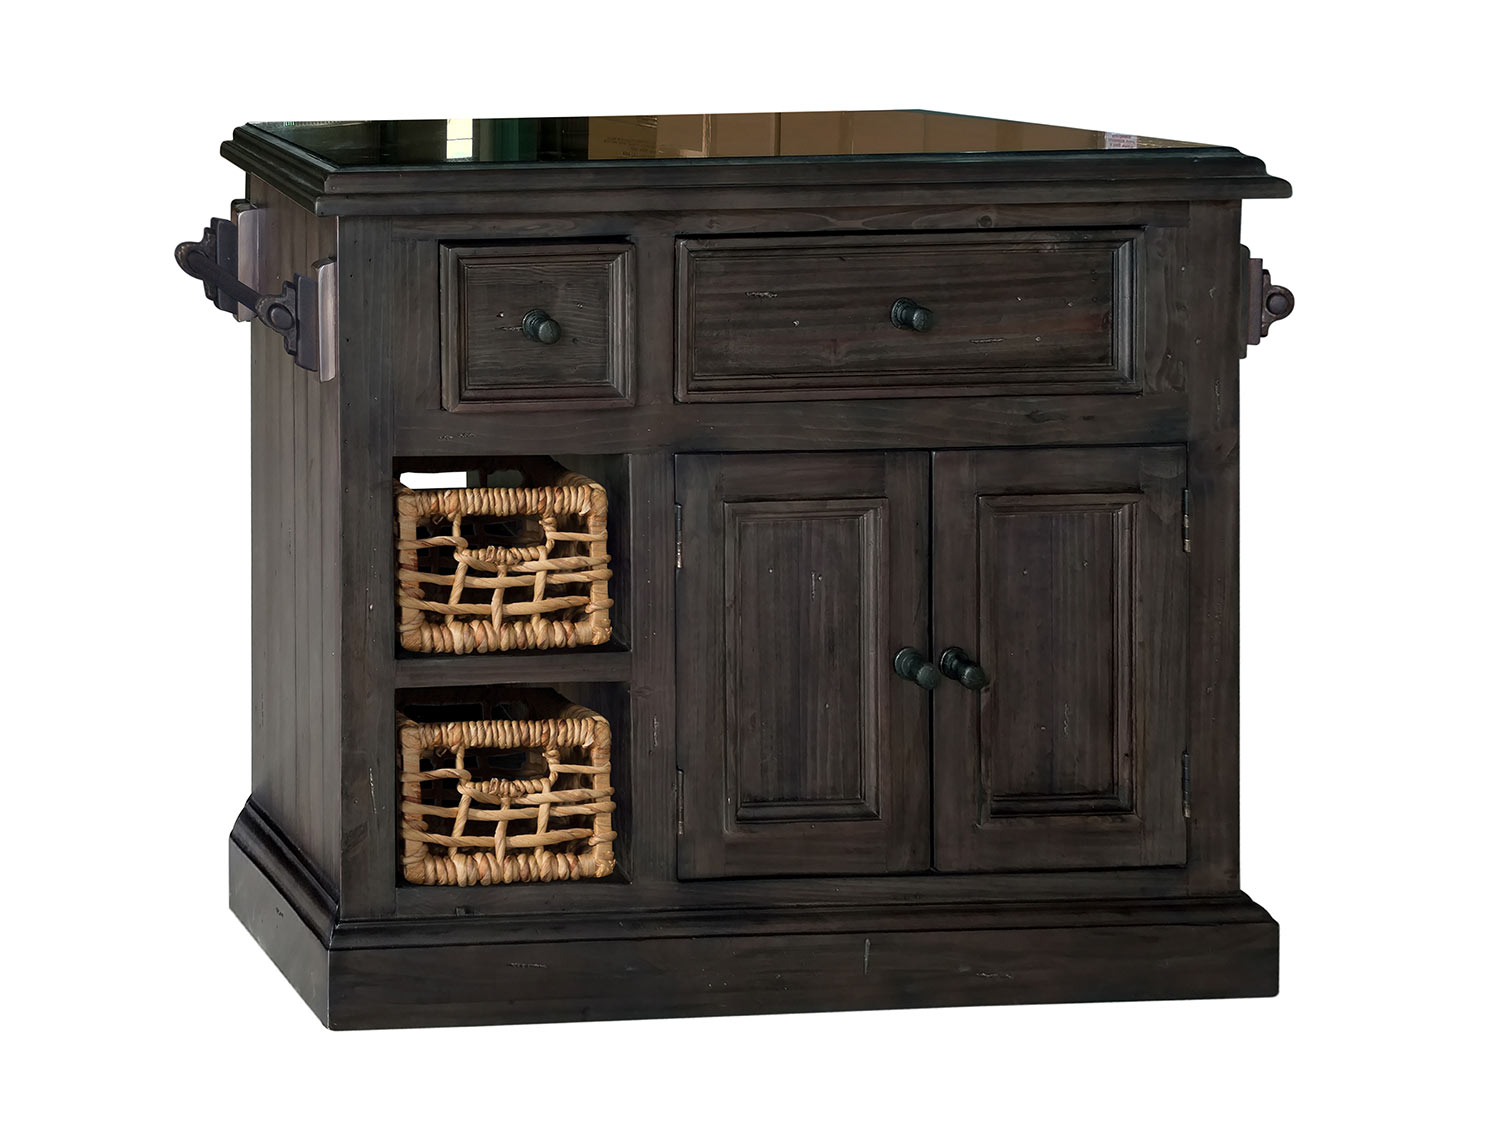 Hillsdale Tuscan Retreat Small Granite Top Kitchen Island with 2 Baskets - Weathered Gray